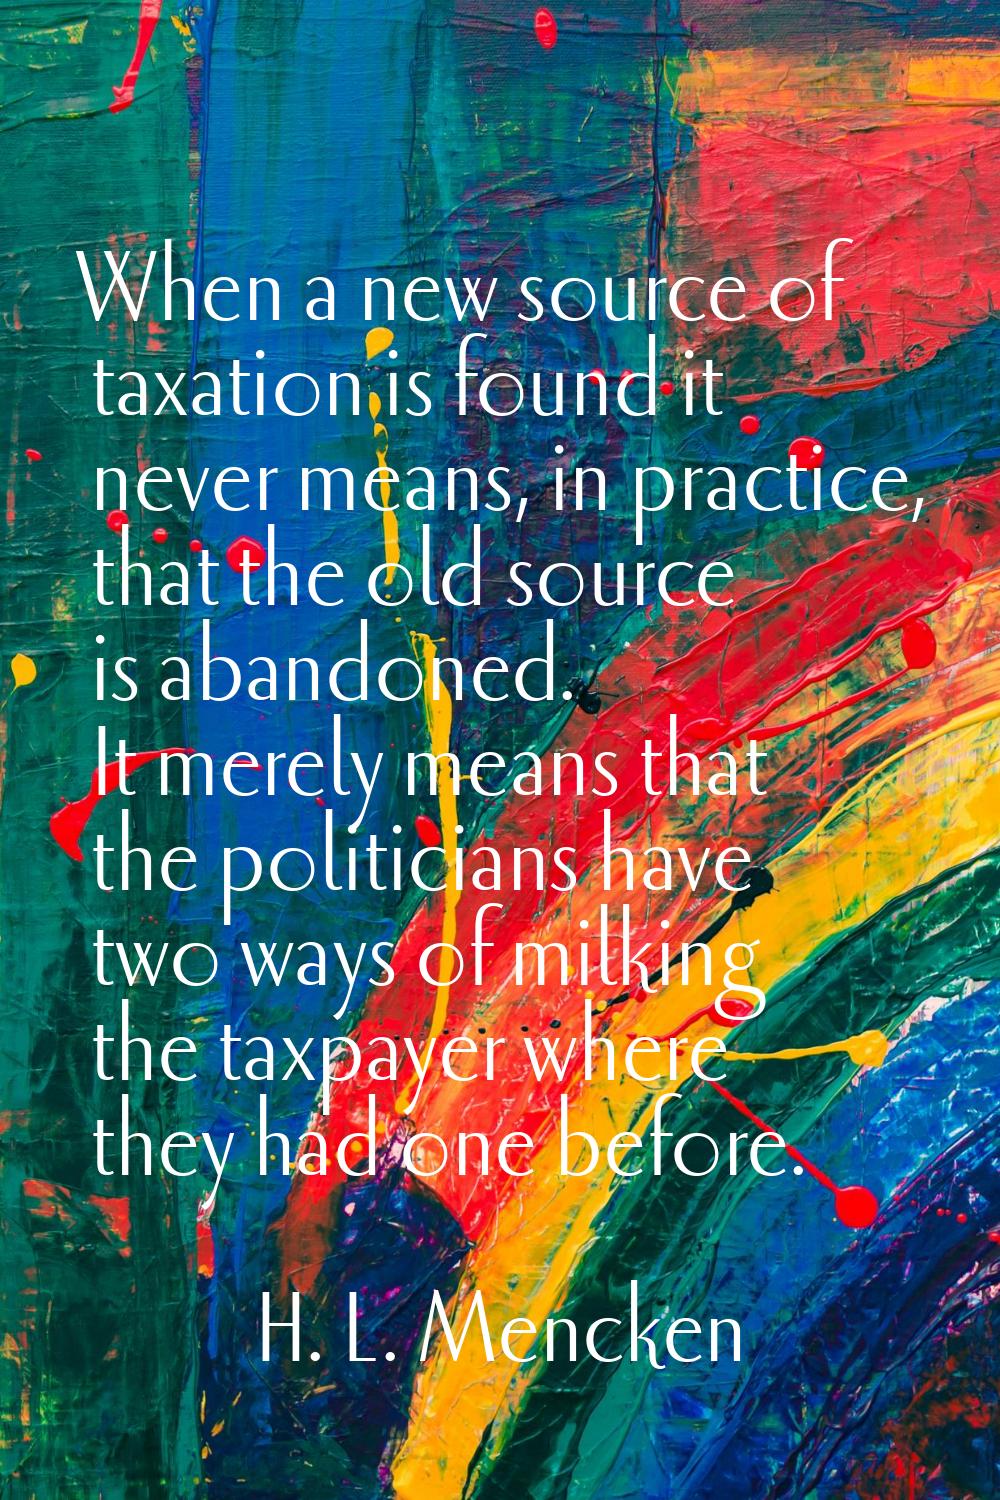 When a new source of taxation is found it never means, in practice, that the old source is abandone